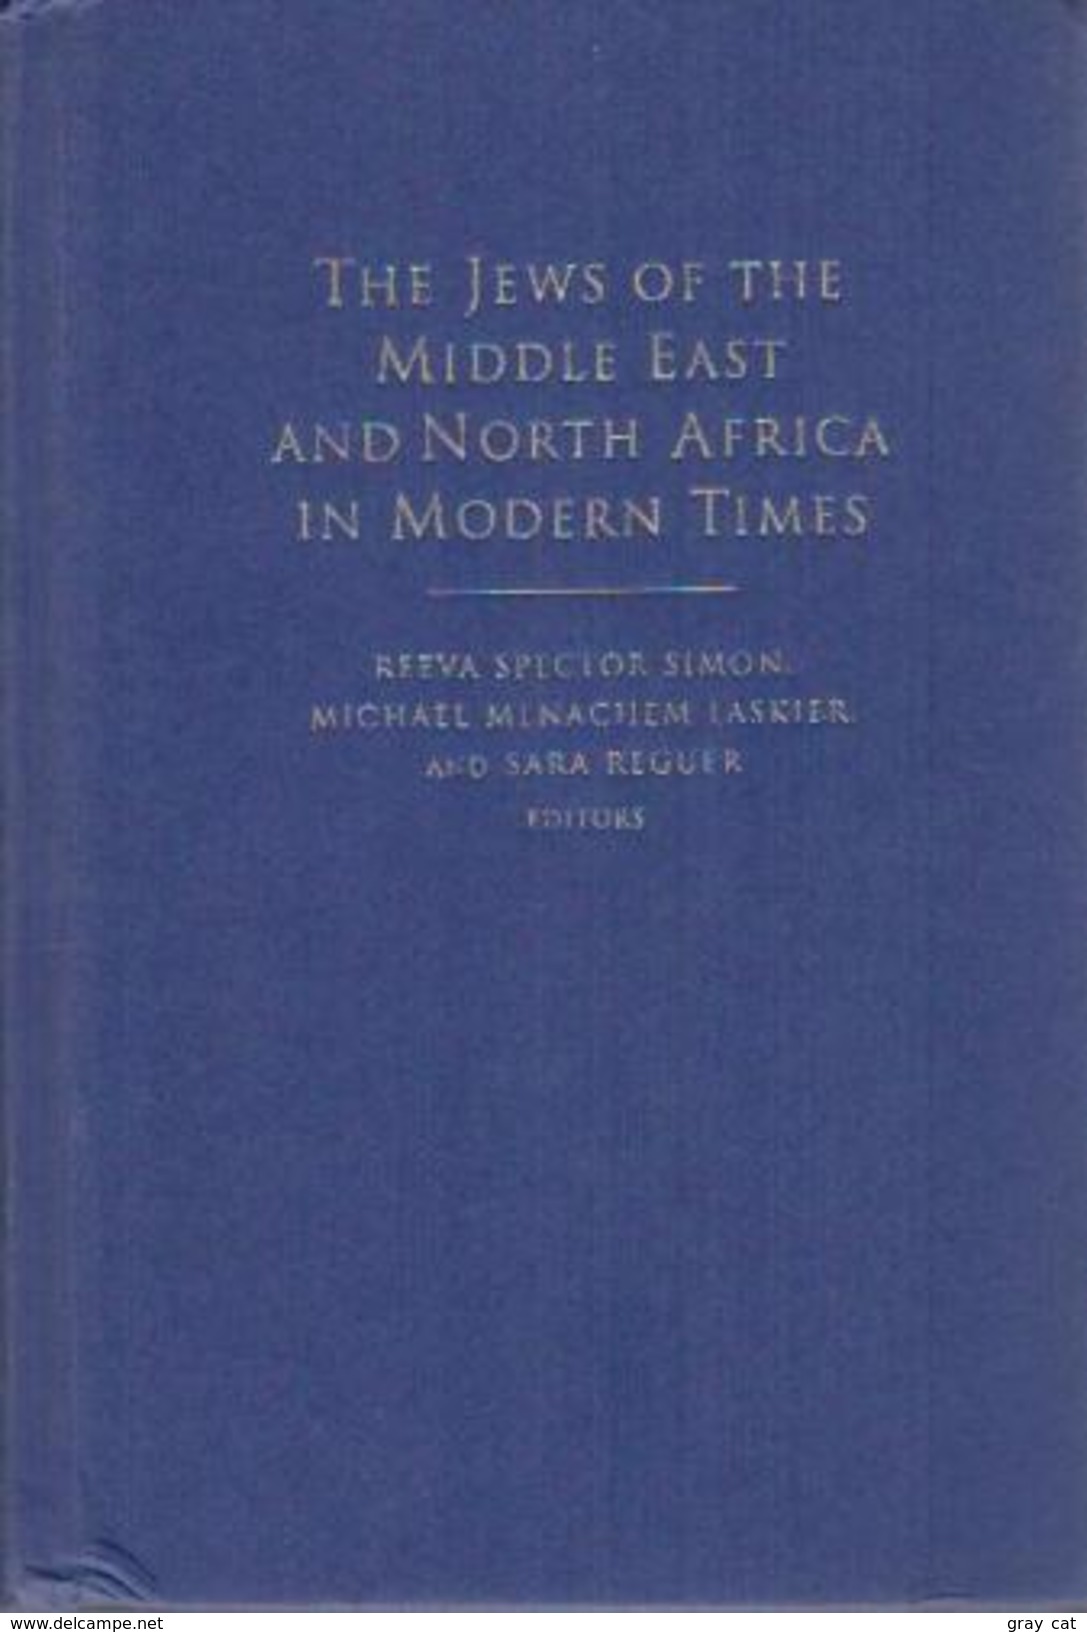 The Jews Of The Middle East And North Africa In Modern Times By Michael Menachem Laskier (ISBN 9780231107969) - Midden-Oosten